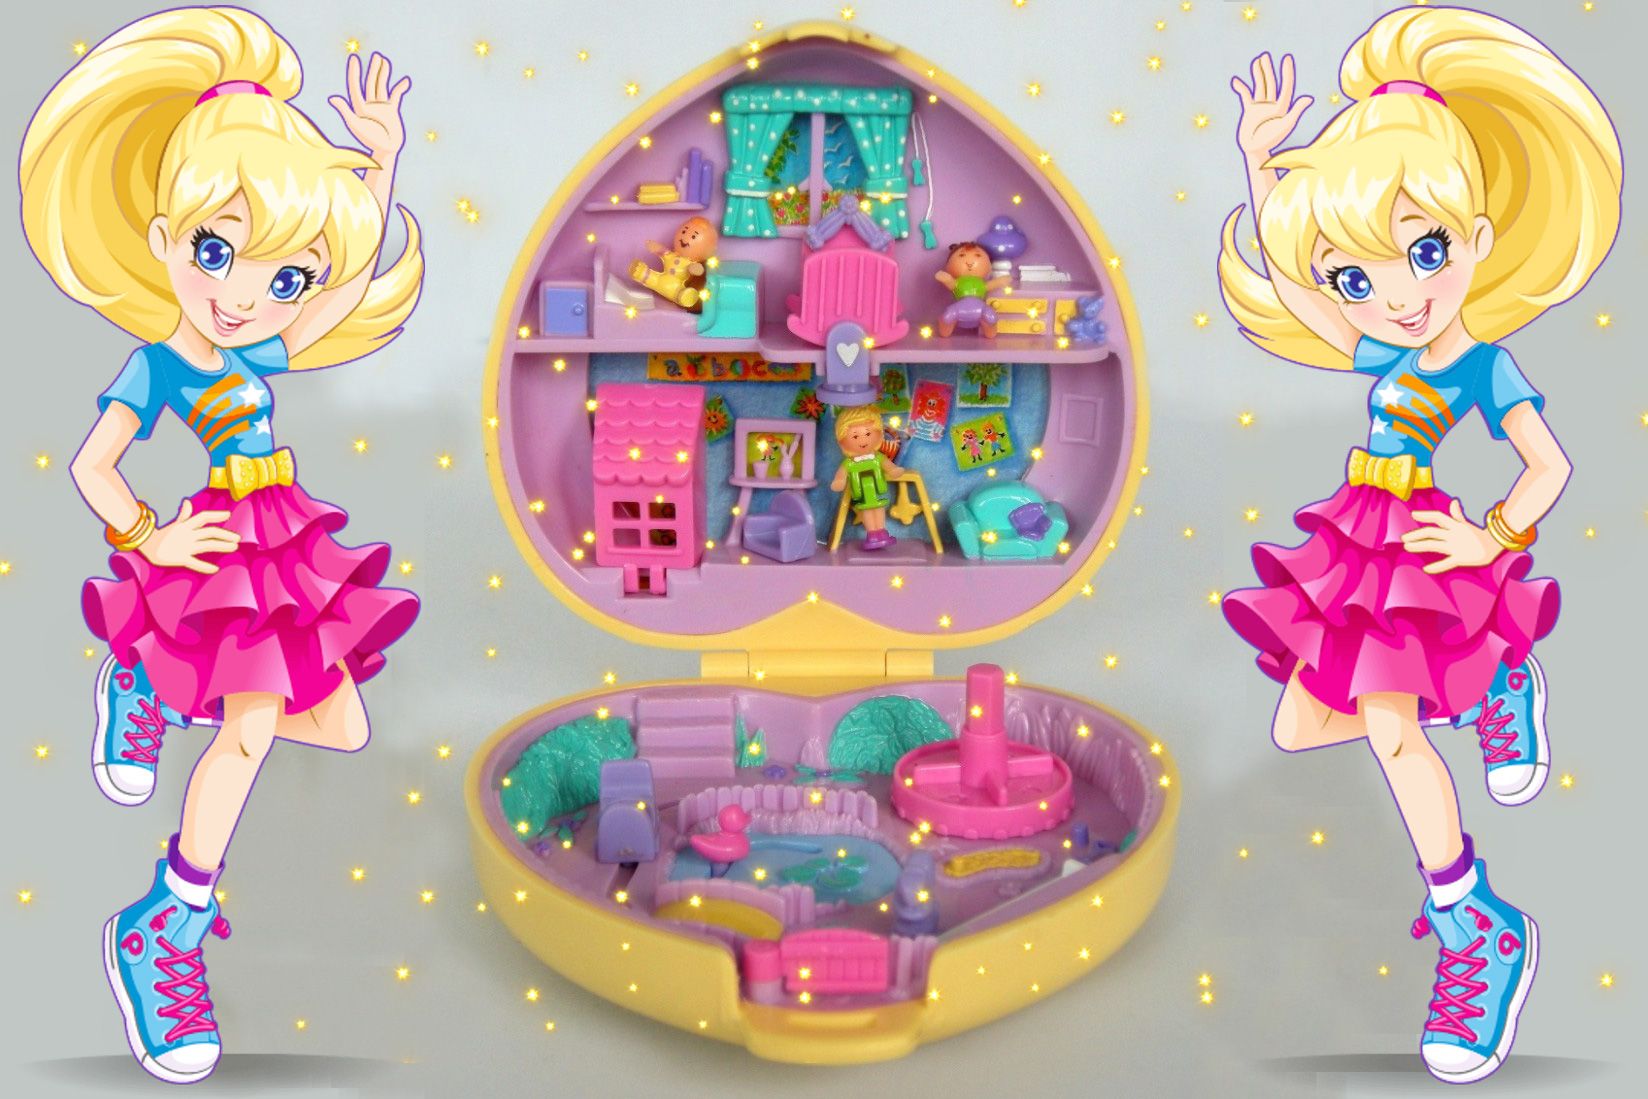 Polly pocket only